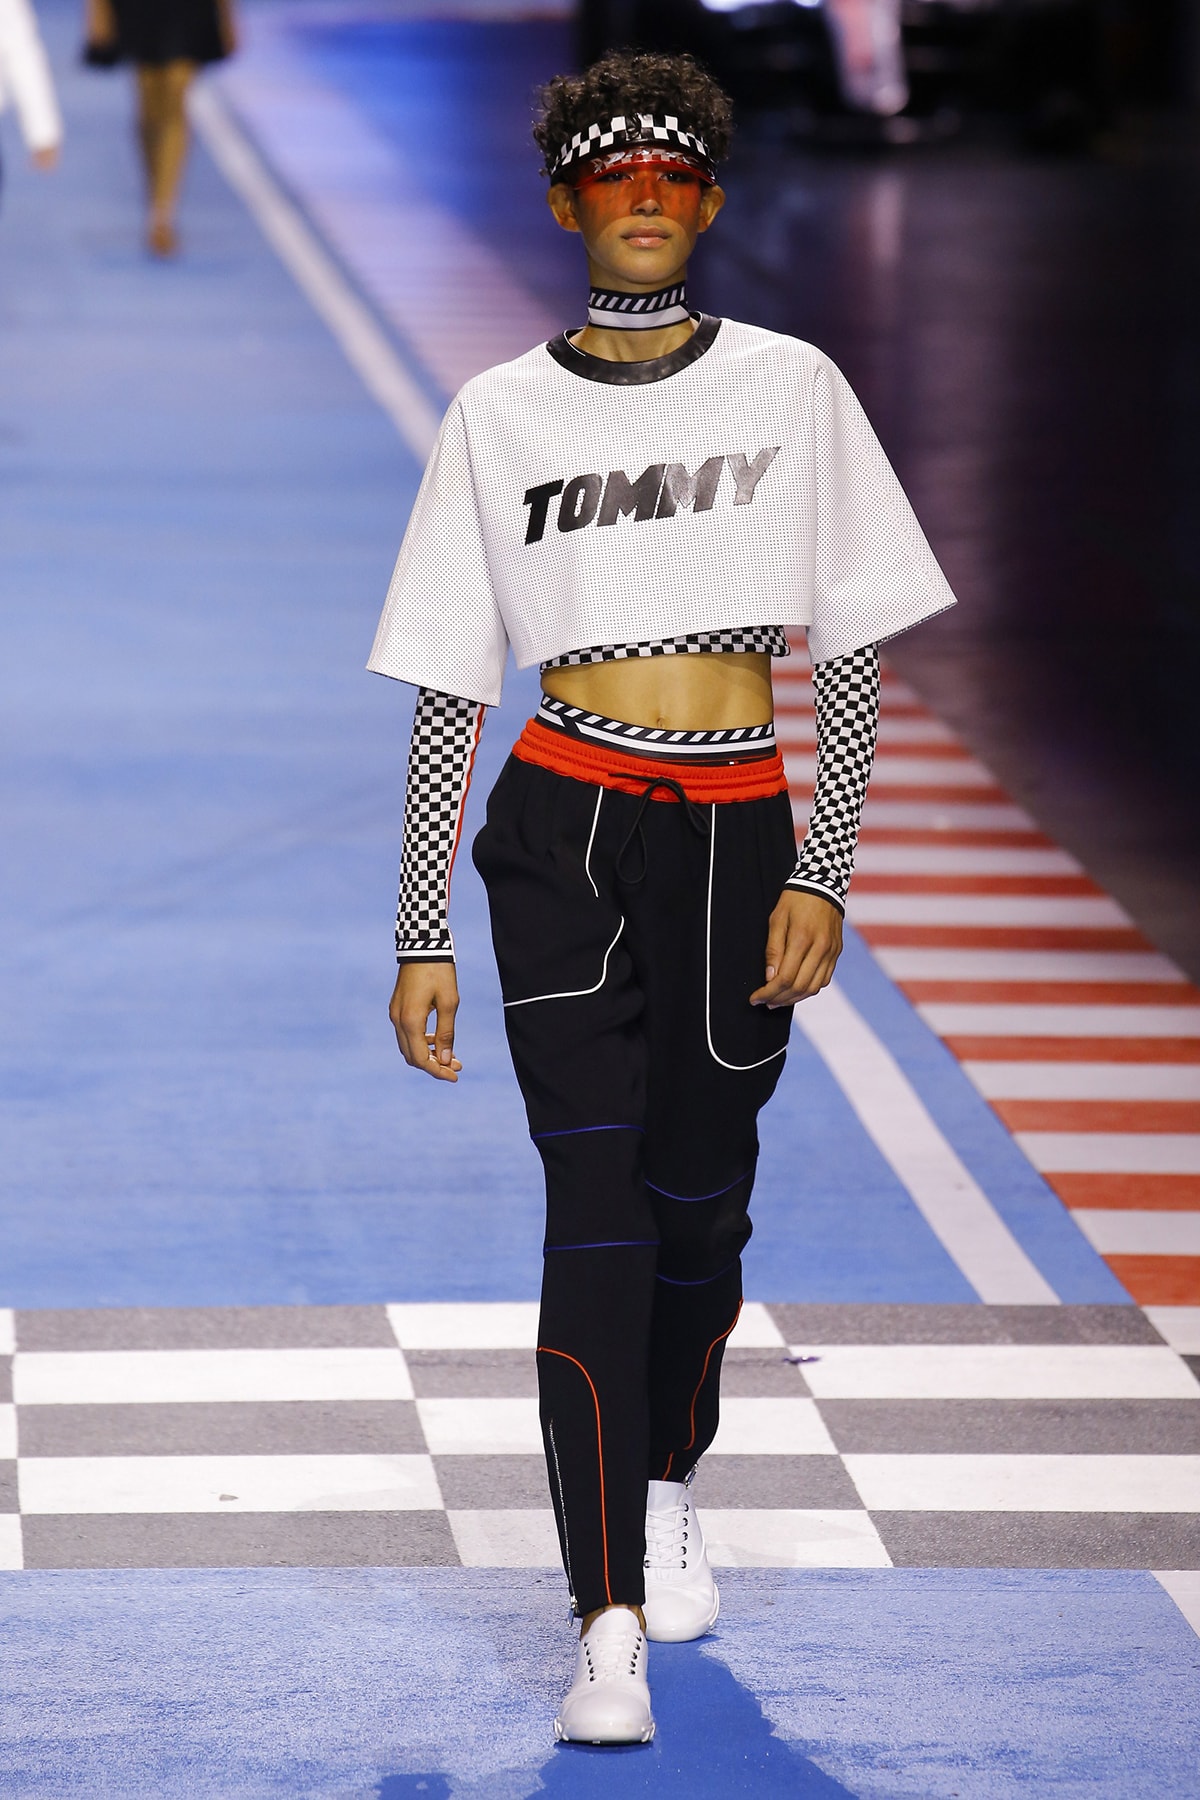 Tommy Hilfiger takes pole position in Milan